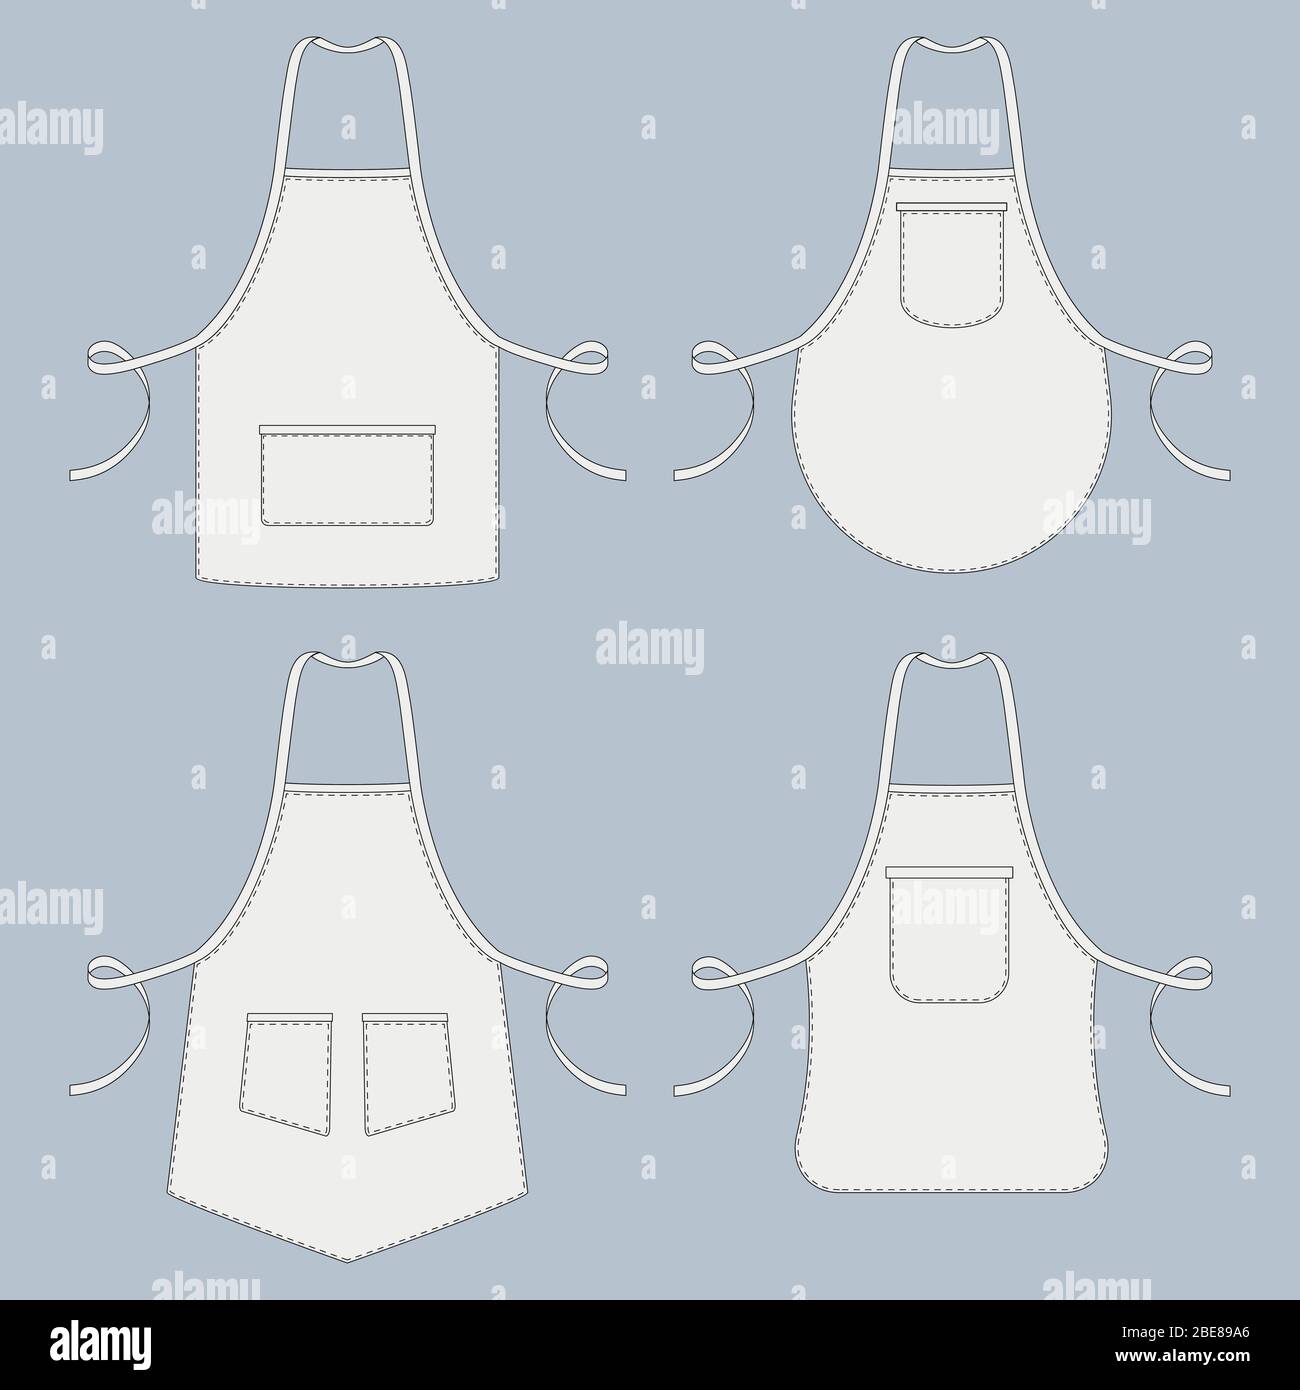 Cook uniform. Restaurant apron vector template collection. Illustration of uniform protective for kitchen and cooking Stock Vector